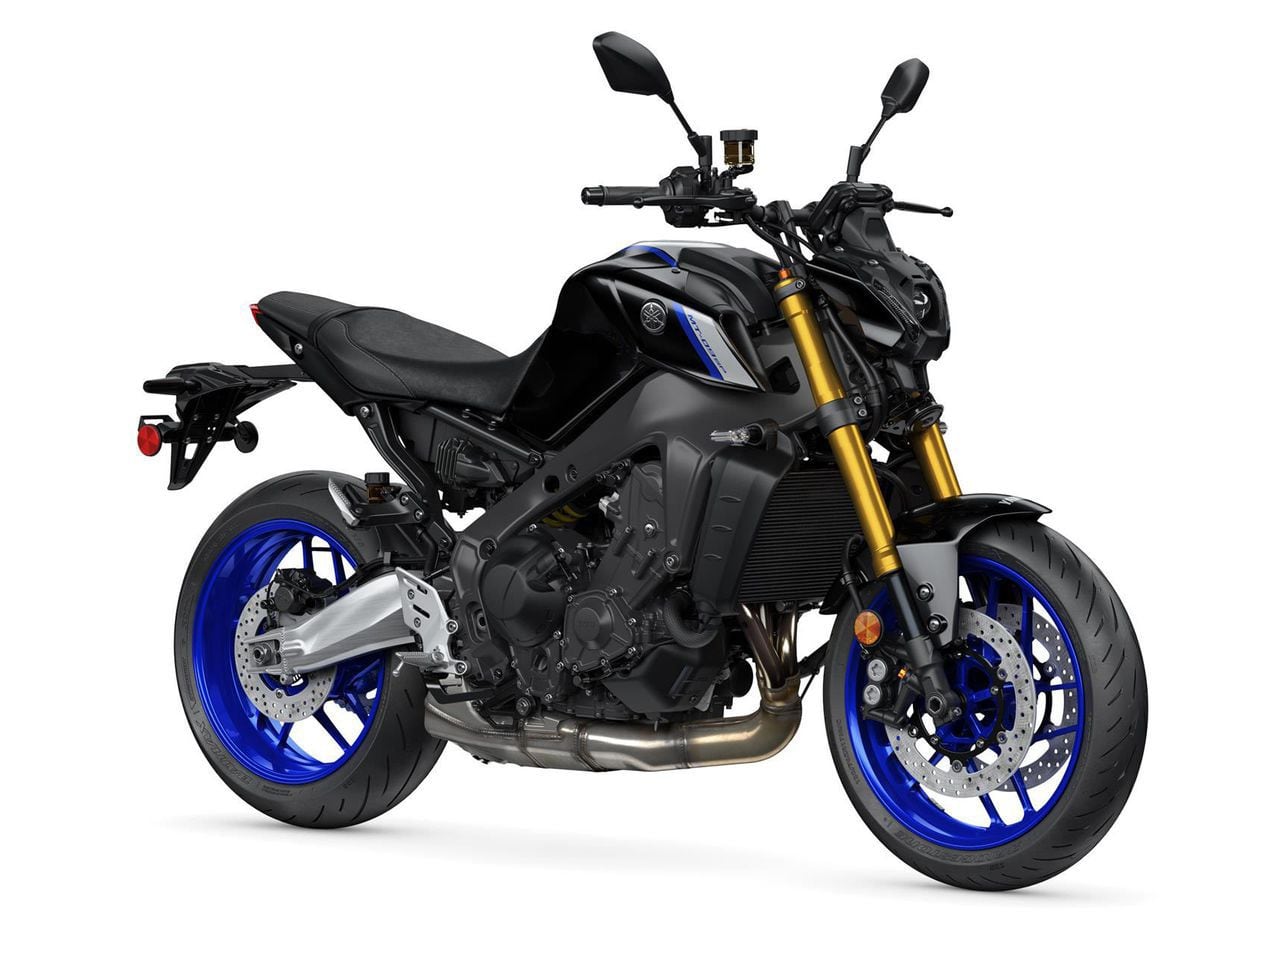 Given the gap in its range and the reveal of new documents, it’s likely Yamaha will be rolling out a new R9 model very soon (MT-09 SP shown).